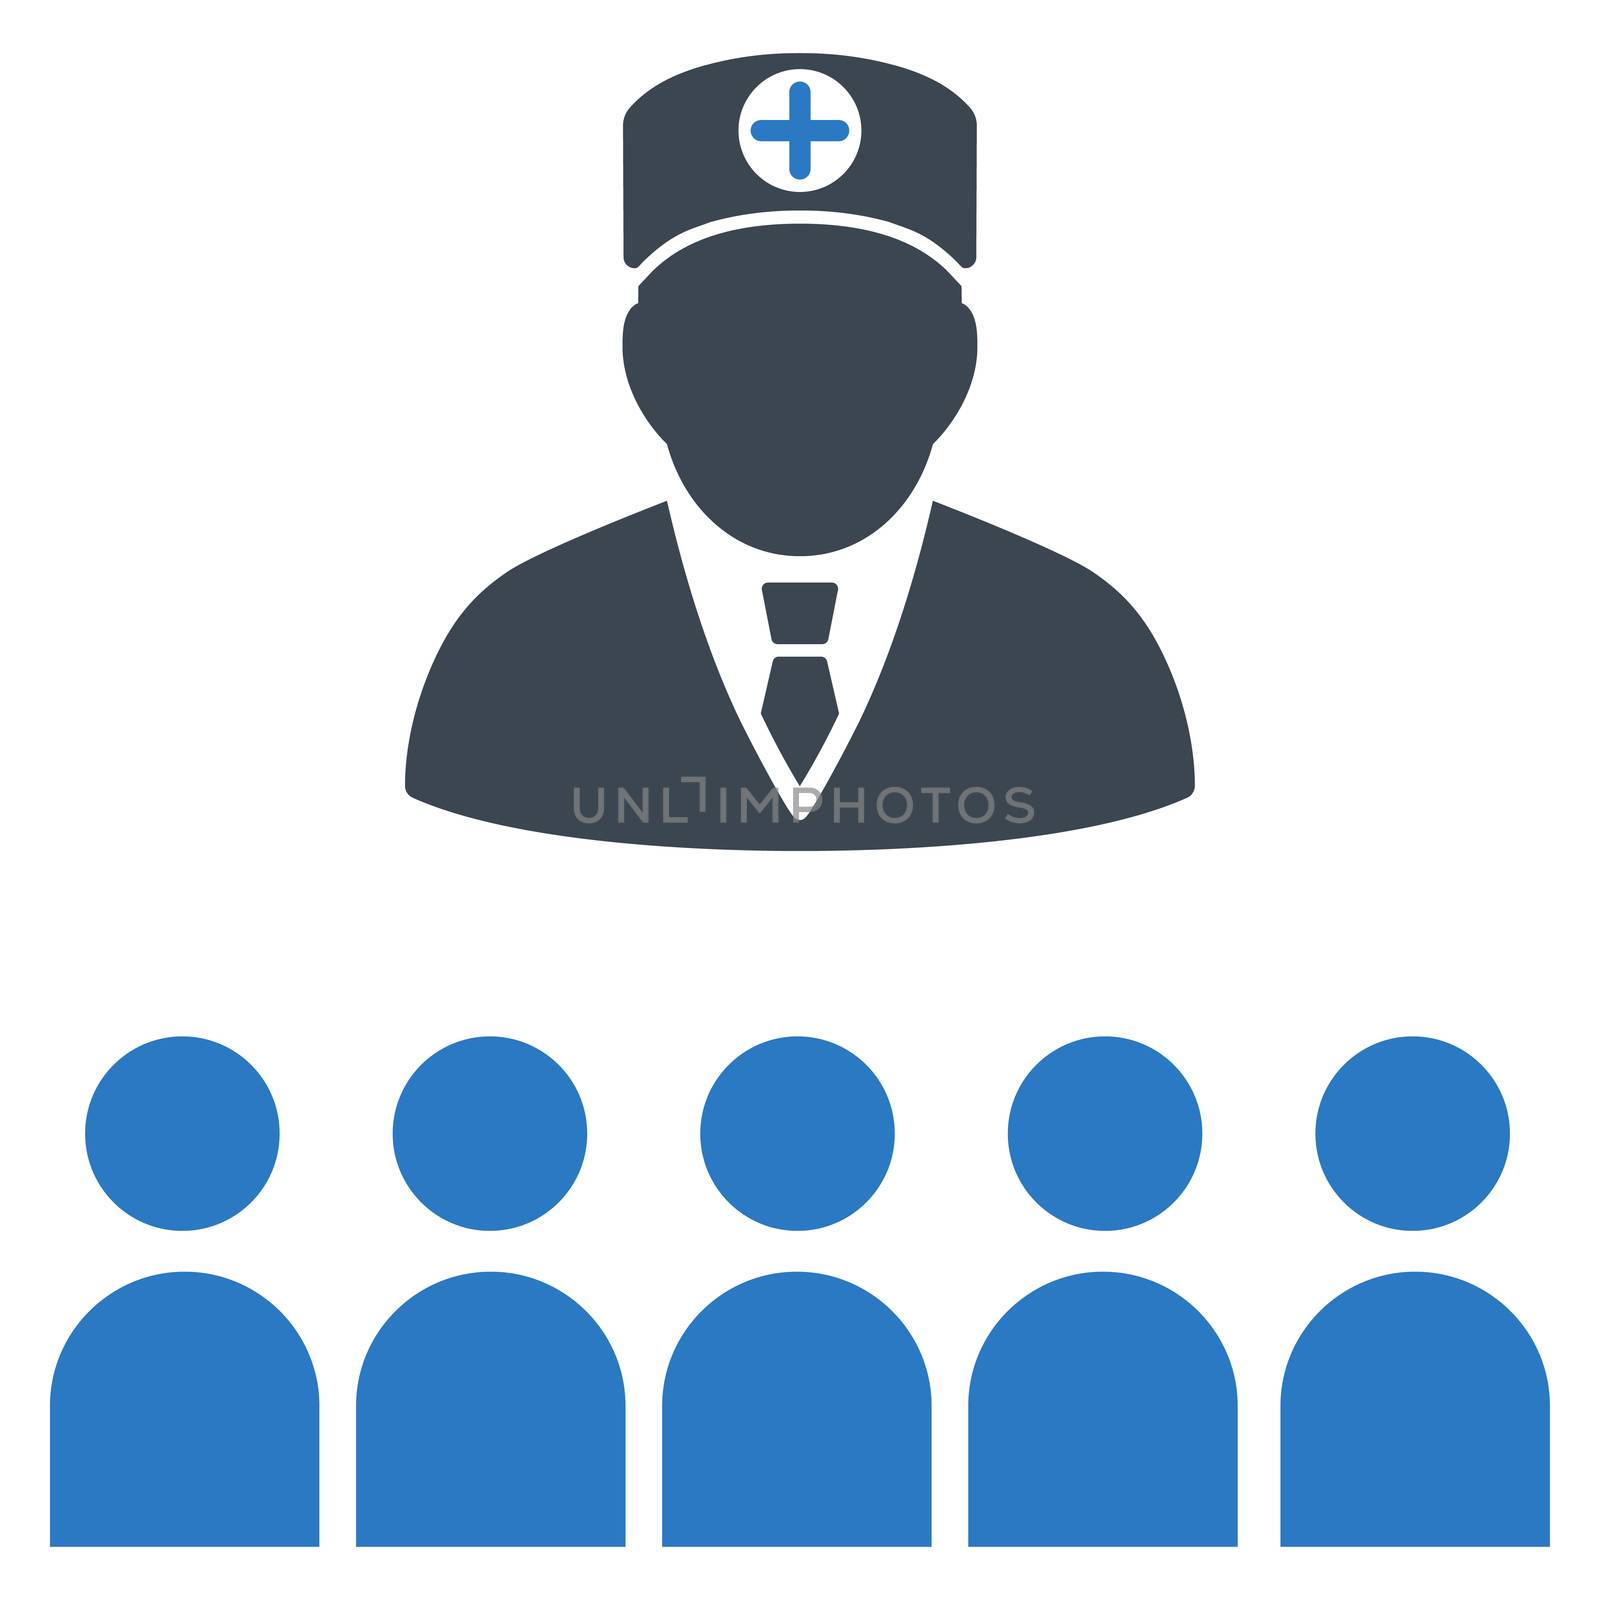 Doctor Class raster icon. Style is bicolor flat symbol, smooth blue colors, rounded angles, white background.